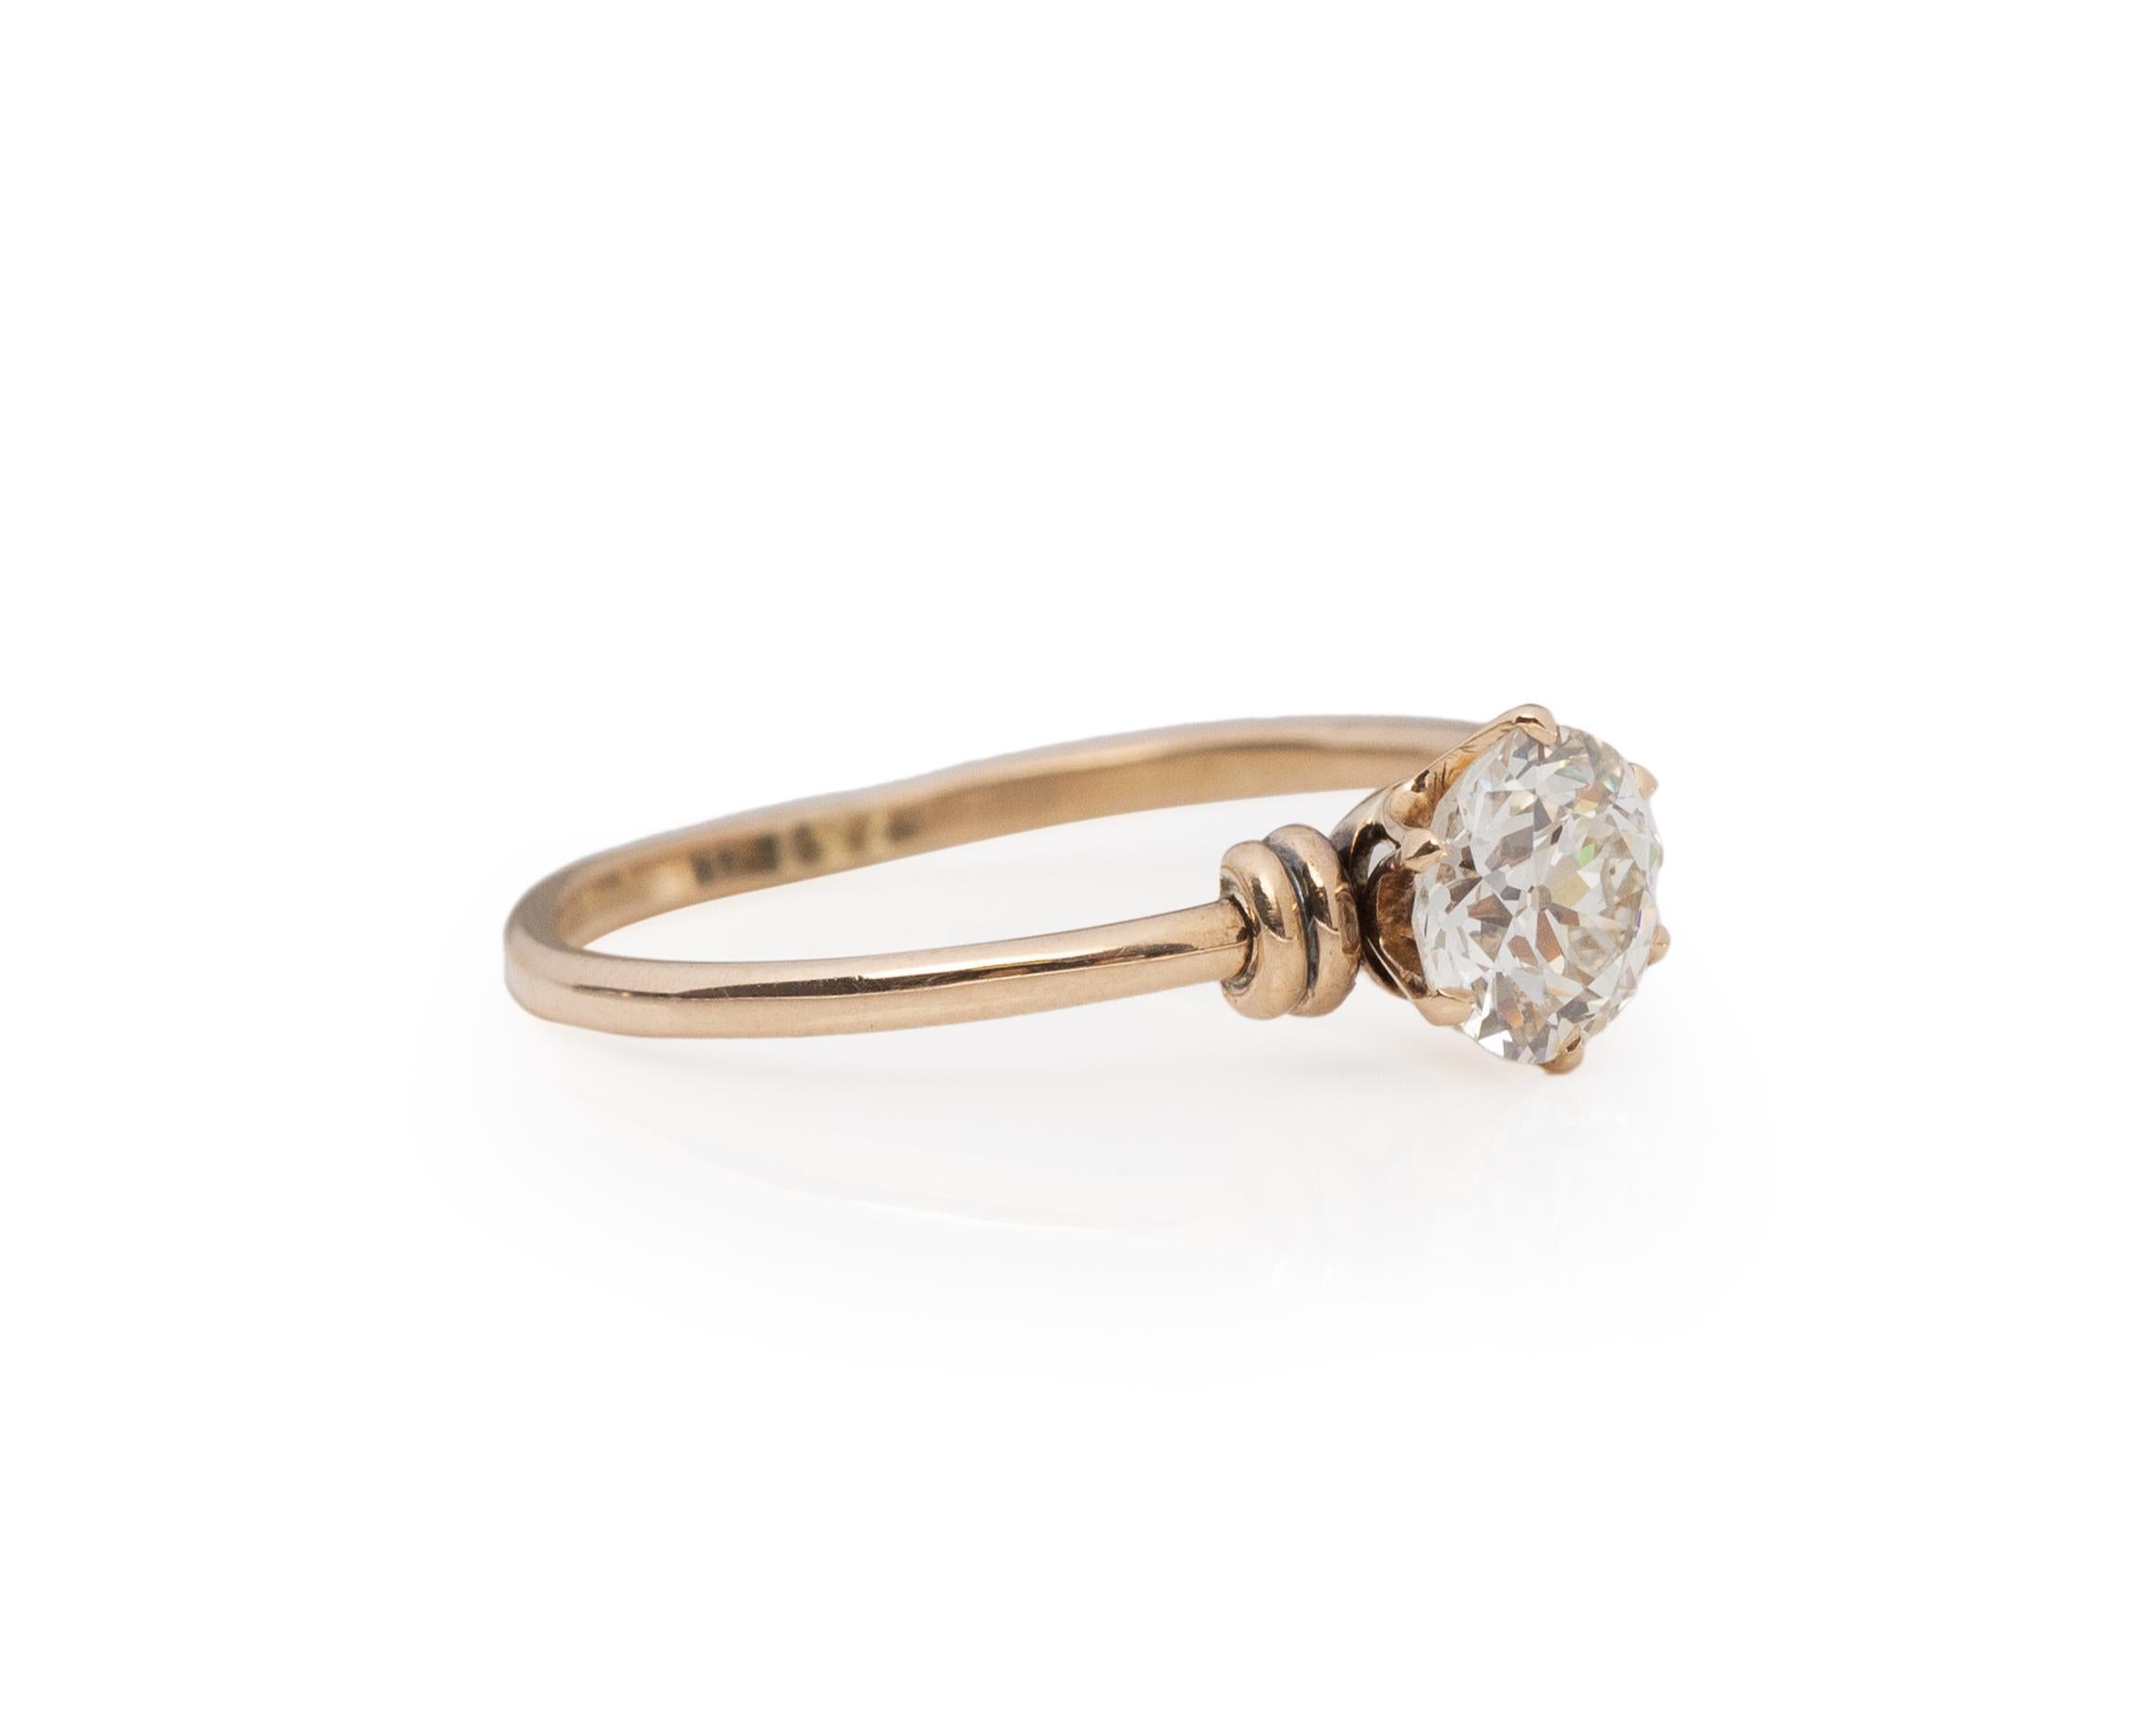 Ring Size: 7.25
Metal Type: 14K Yellow Gold [Hallmarked, and Tested]
Weight: 1.5grams

Center Diamond Details:
GIA REPORT #: 5211274200
Weight: .89ct
Cut: Old European brilliant
Color: J
Clarity: VS1
Measurements: 6.26mm x 6.05mm x 3.79mm

Finger to